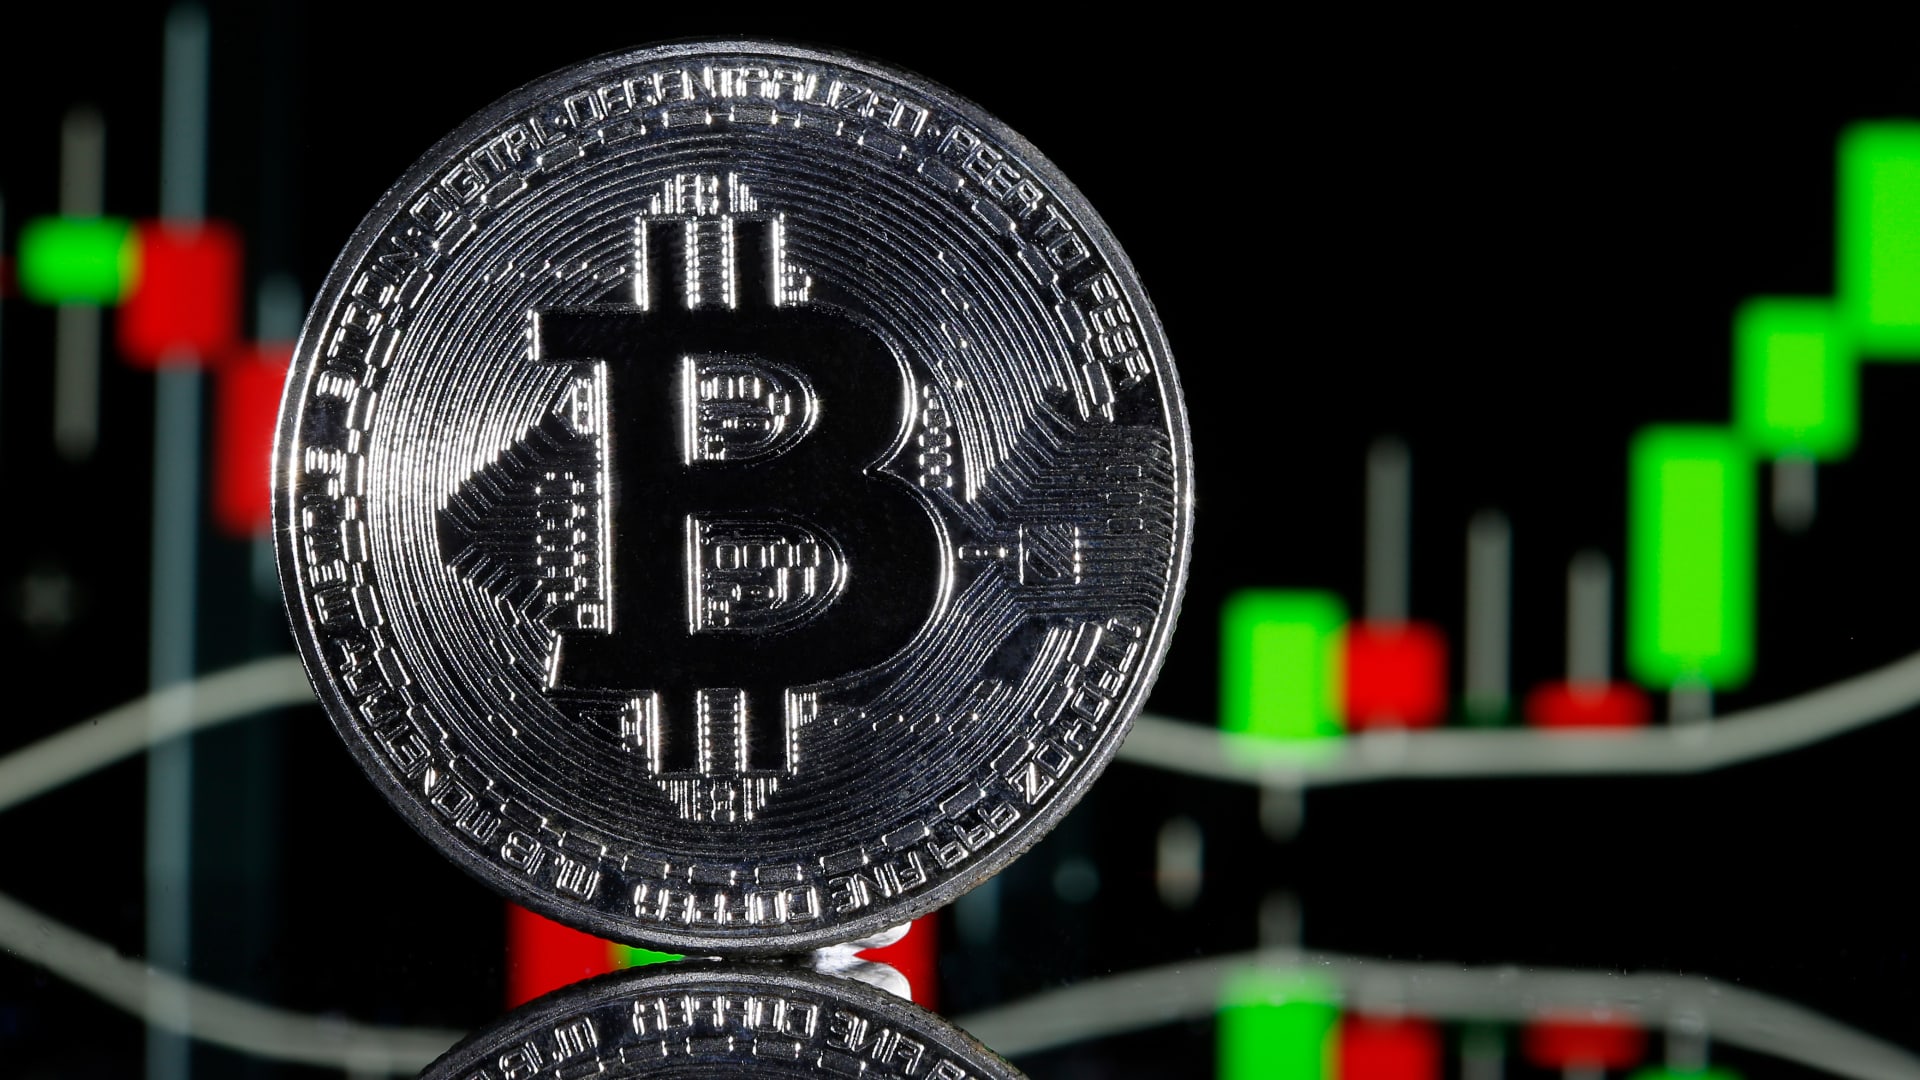 Bitcoin Slides as Market Struggles, Analysts Warn of Extended Sideways Movement